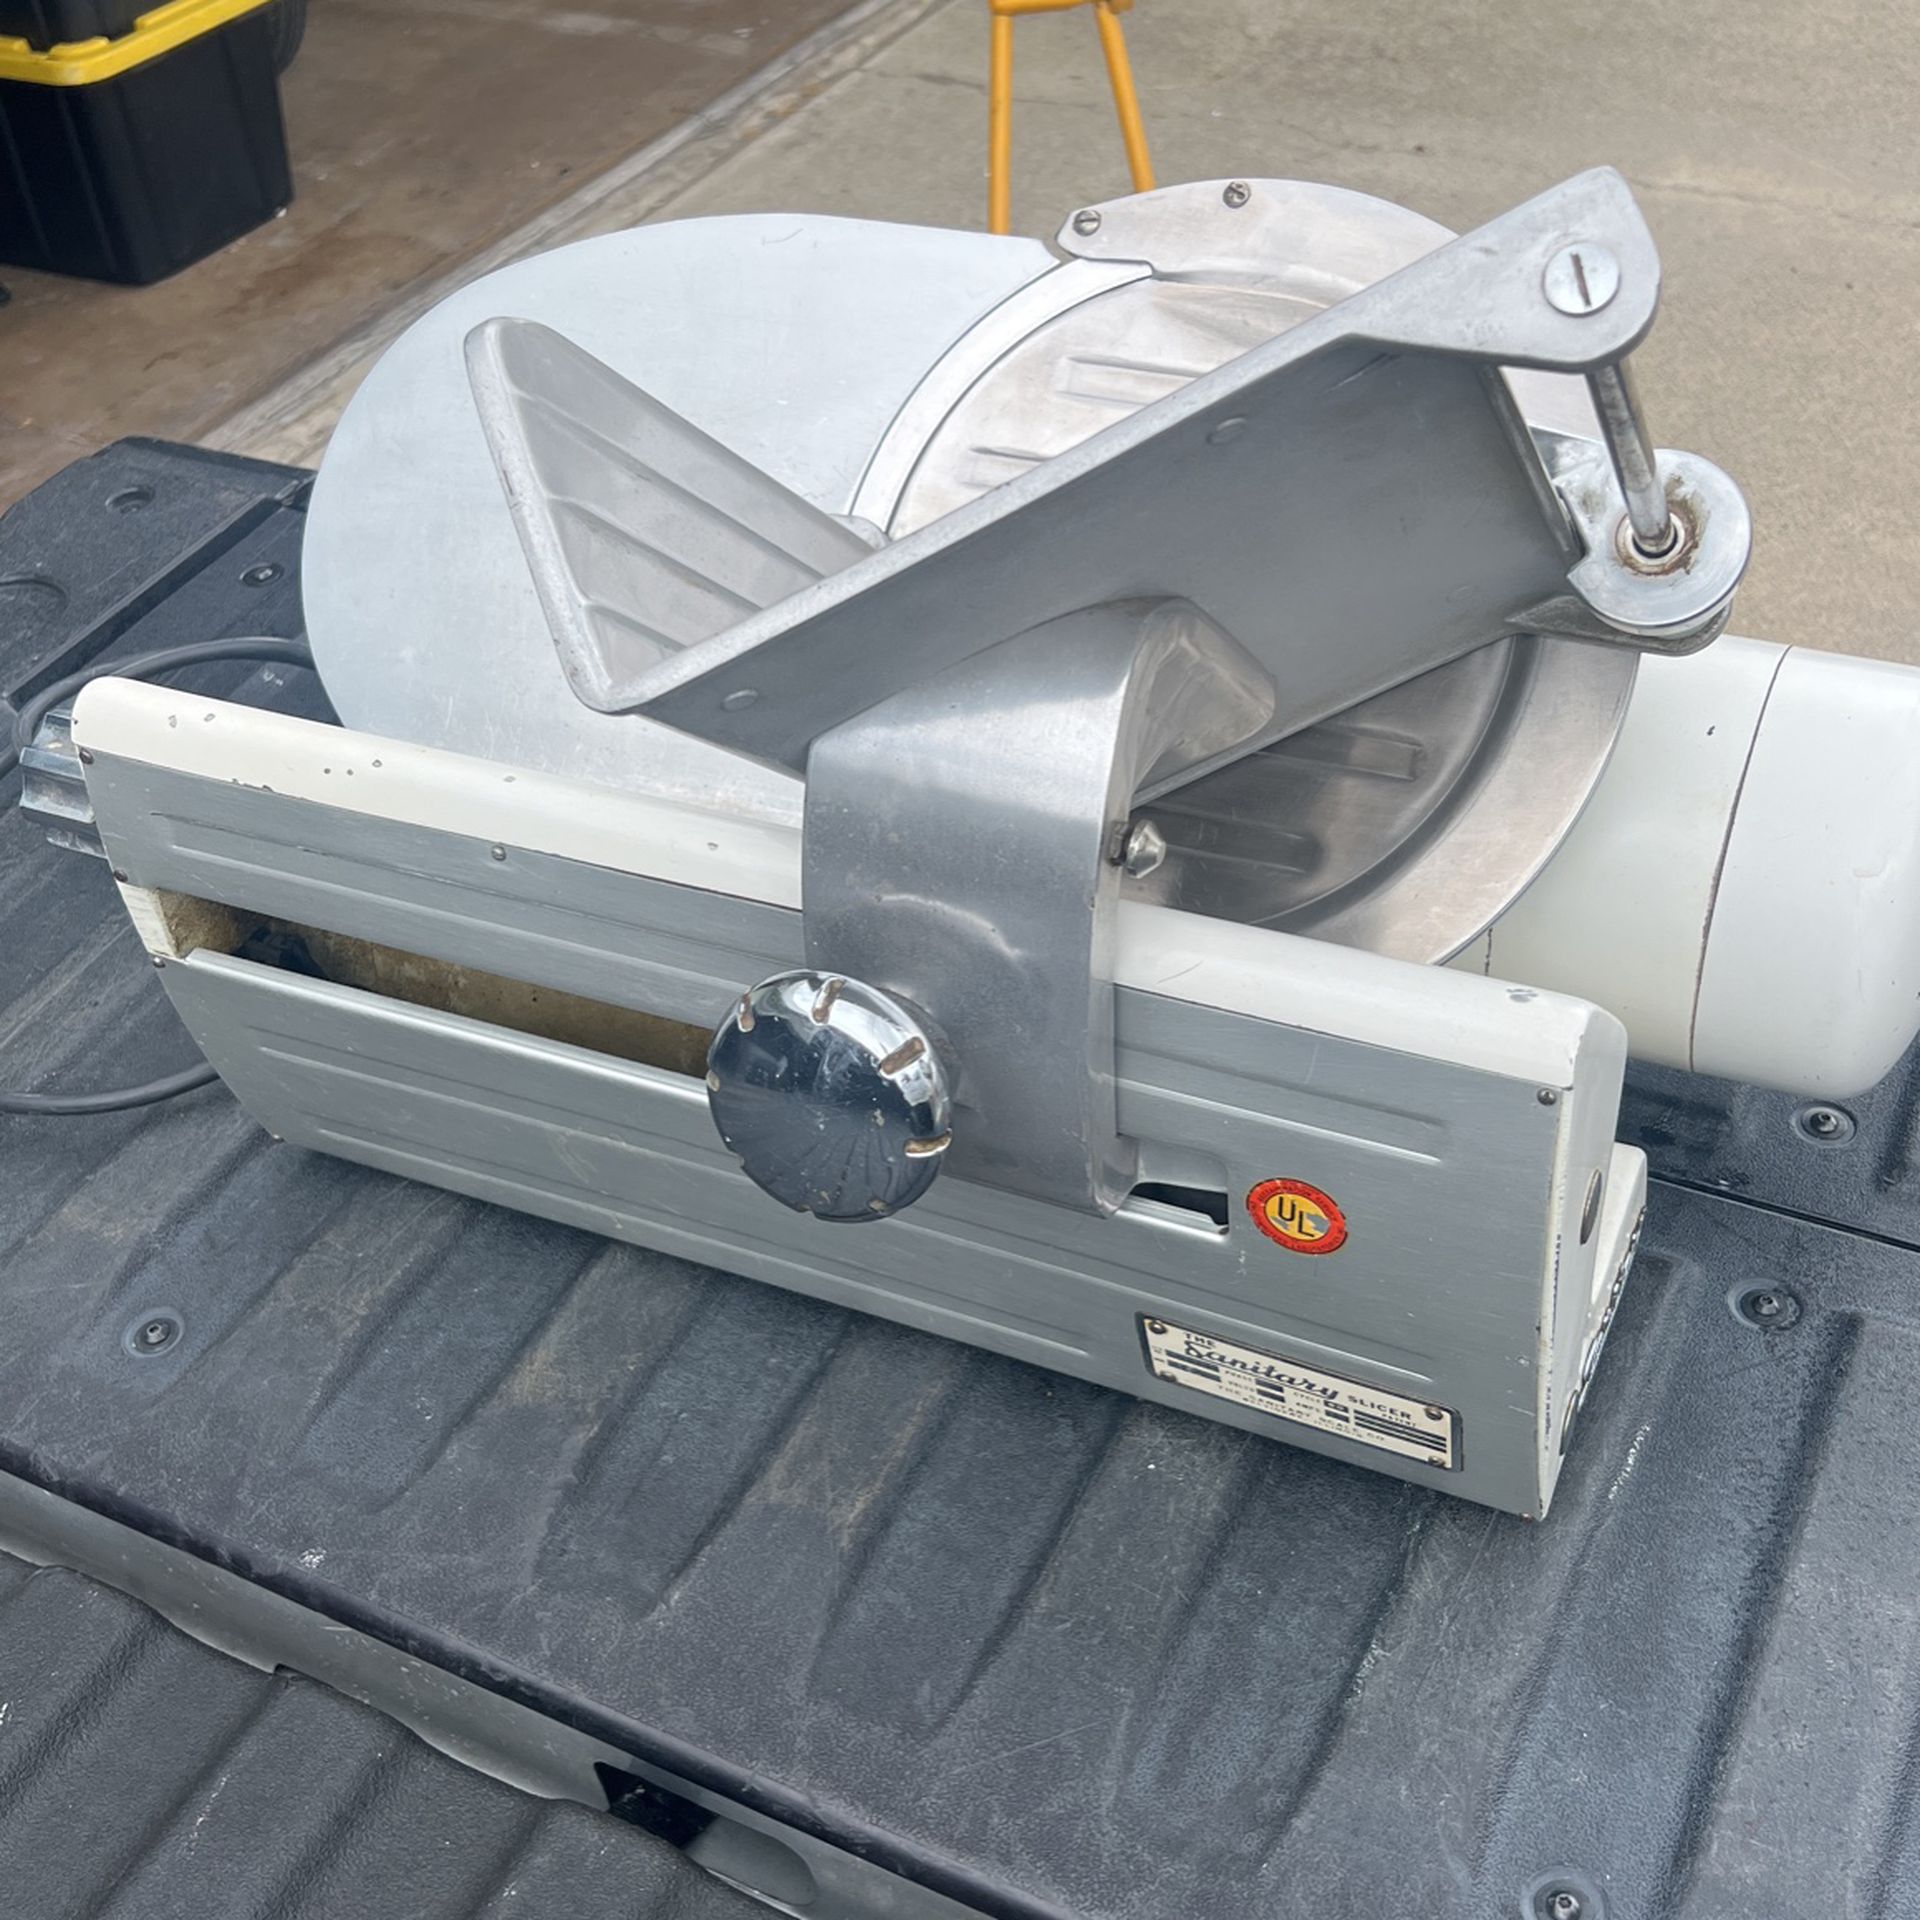 Taco meat dicer chopper slicer meat cutting machine for Sale in Bell  Gardens, CA - OfferUp